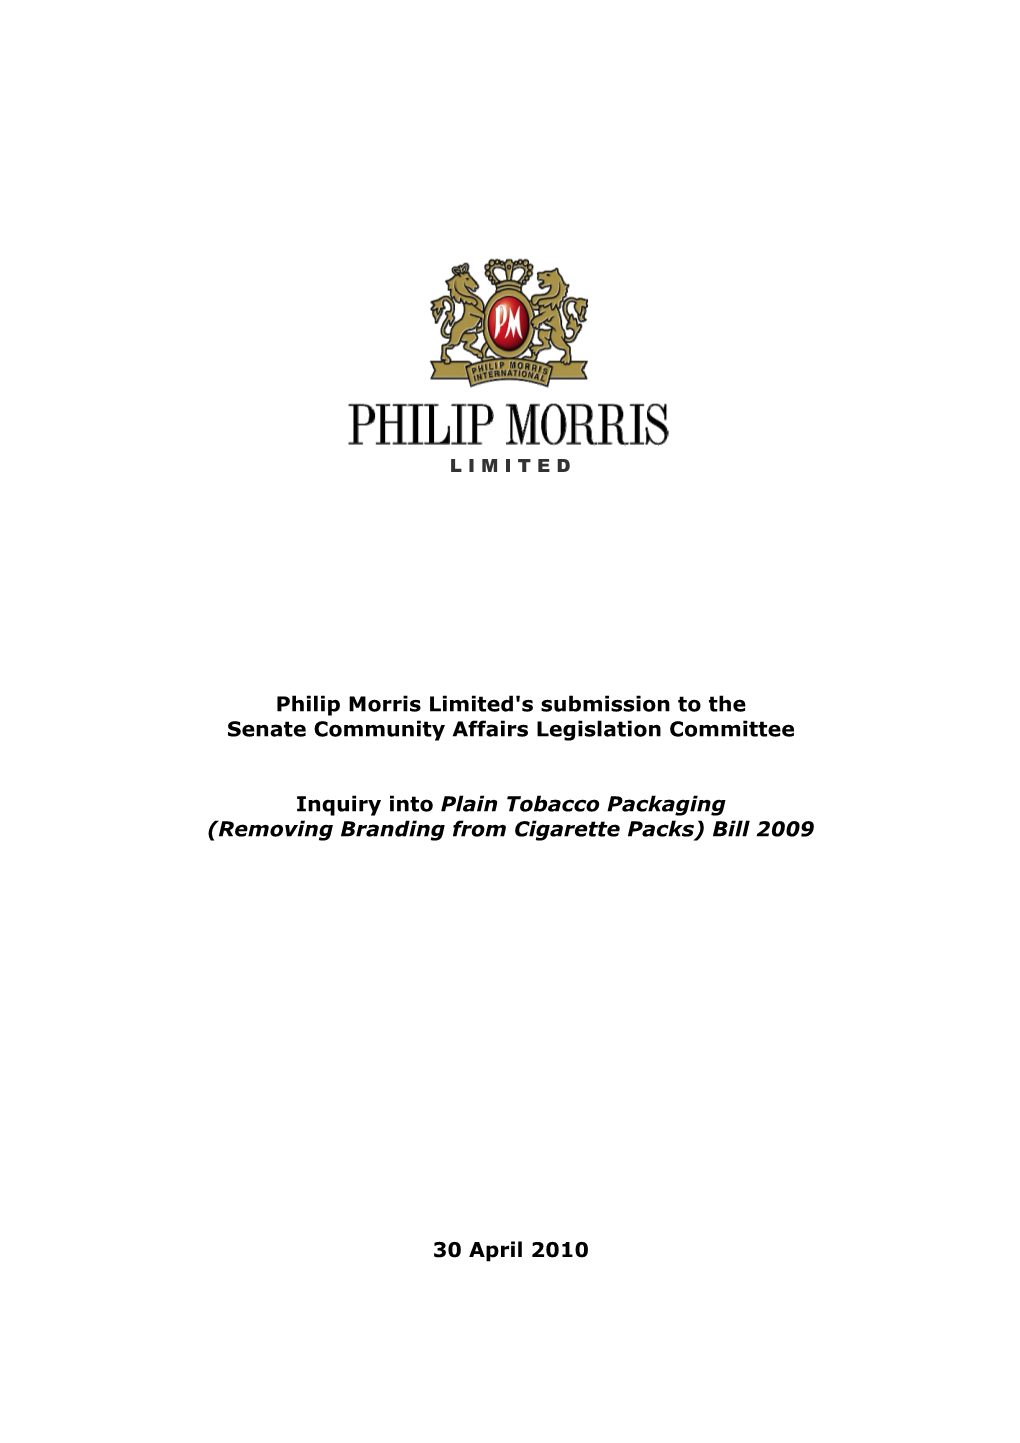 Inquiry Into Plain Tobacco Packaging (Removing Branding from Cigarette Packs) Bill 2009